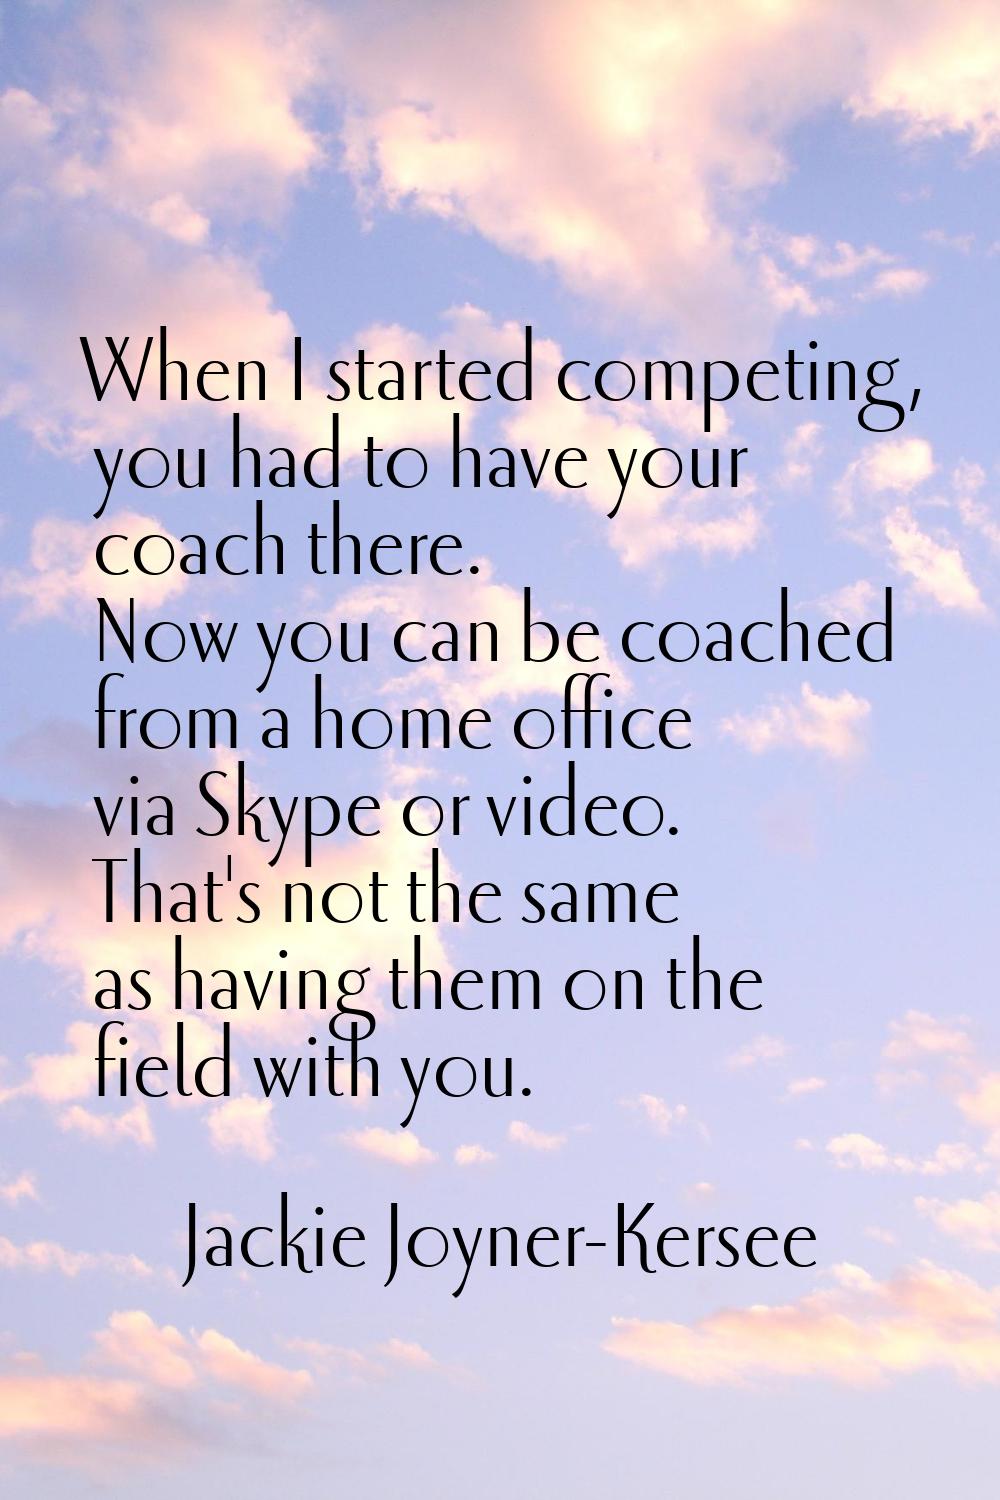 When I started competing, you had to have your coach there. Now you can be coached from a home offi